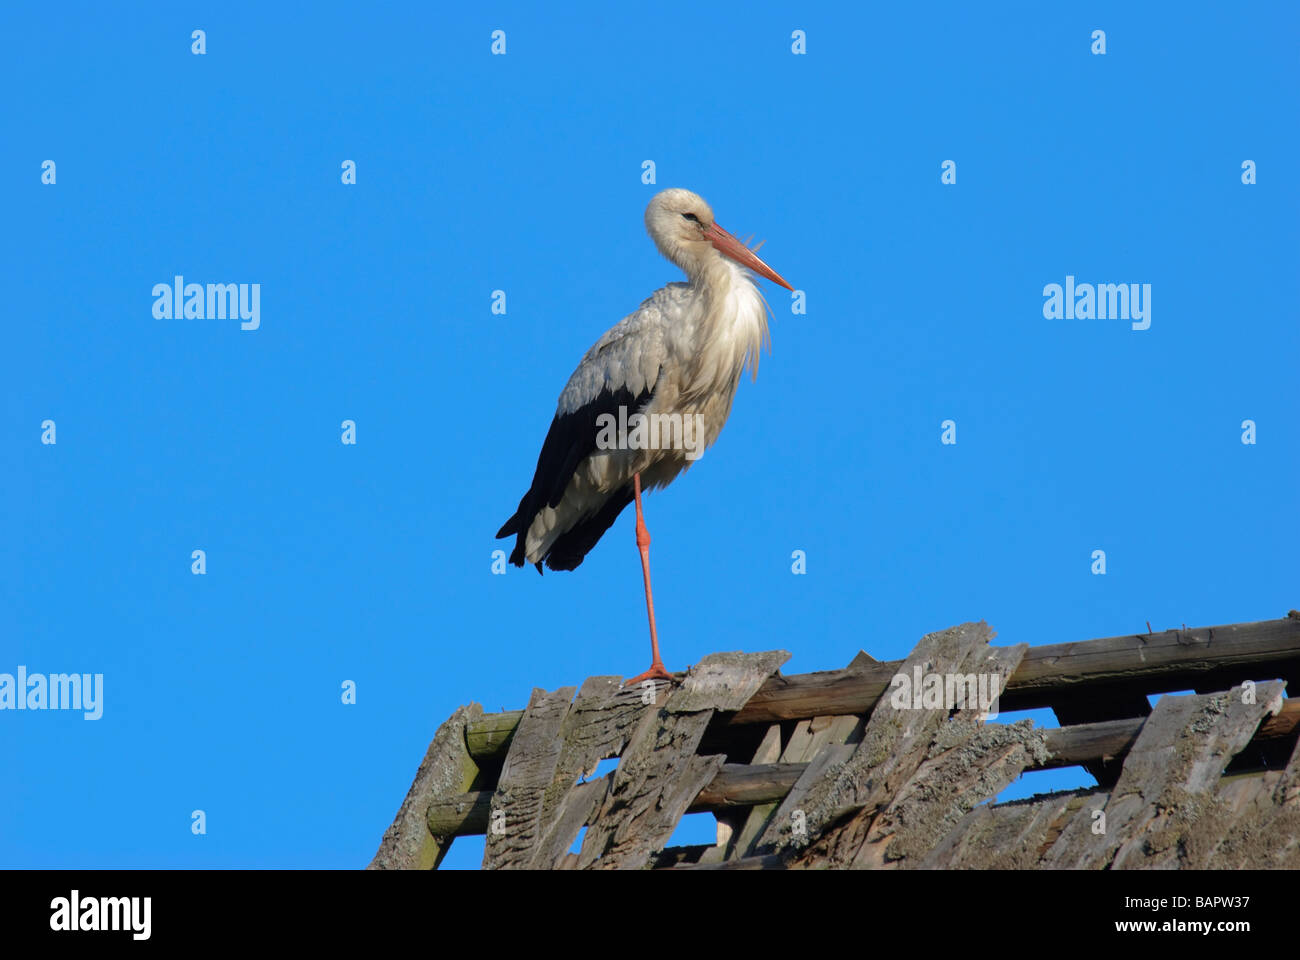 White Stork Ciconia ciconia standing on a roof Stock Photo